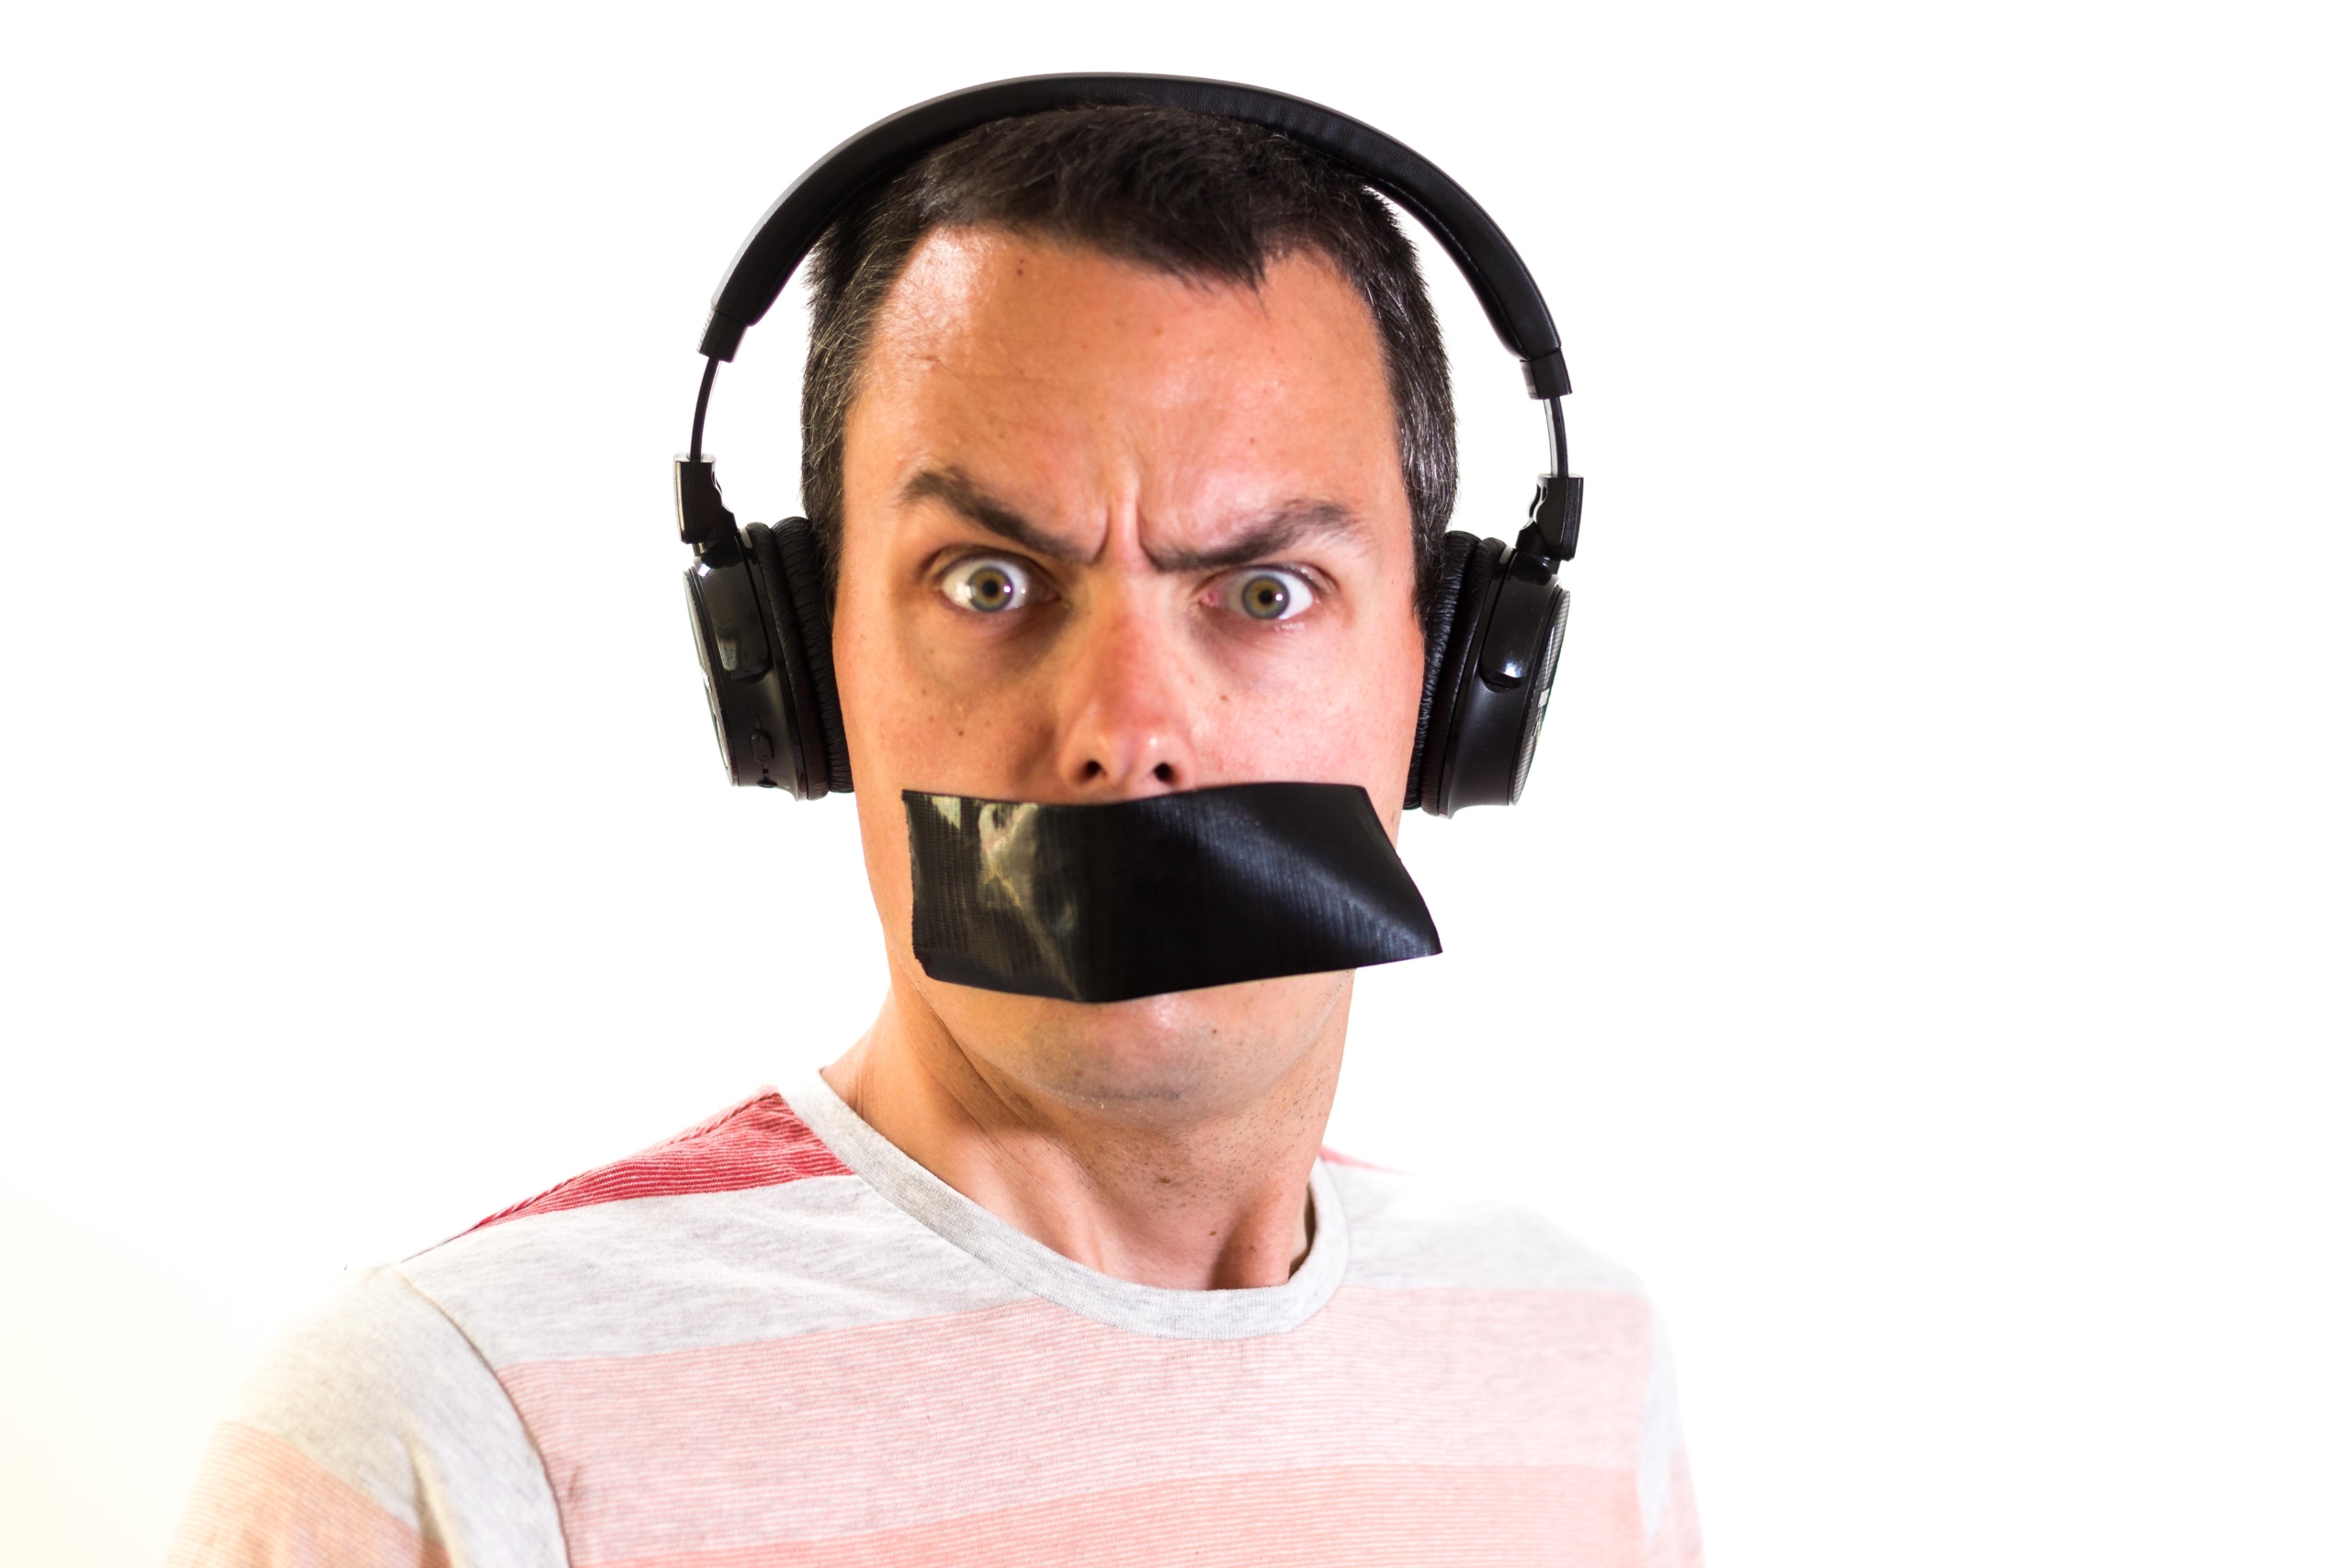 Marc Steele wearing headphones and looking startled, with some duct tape over his mouth